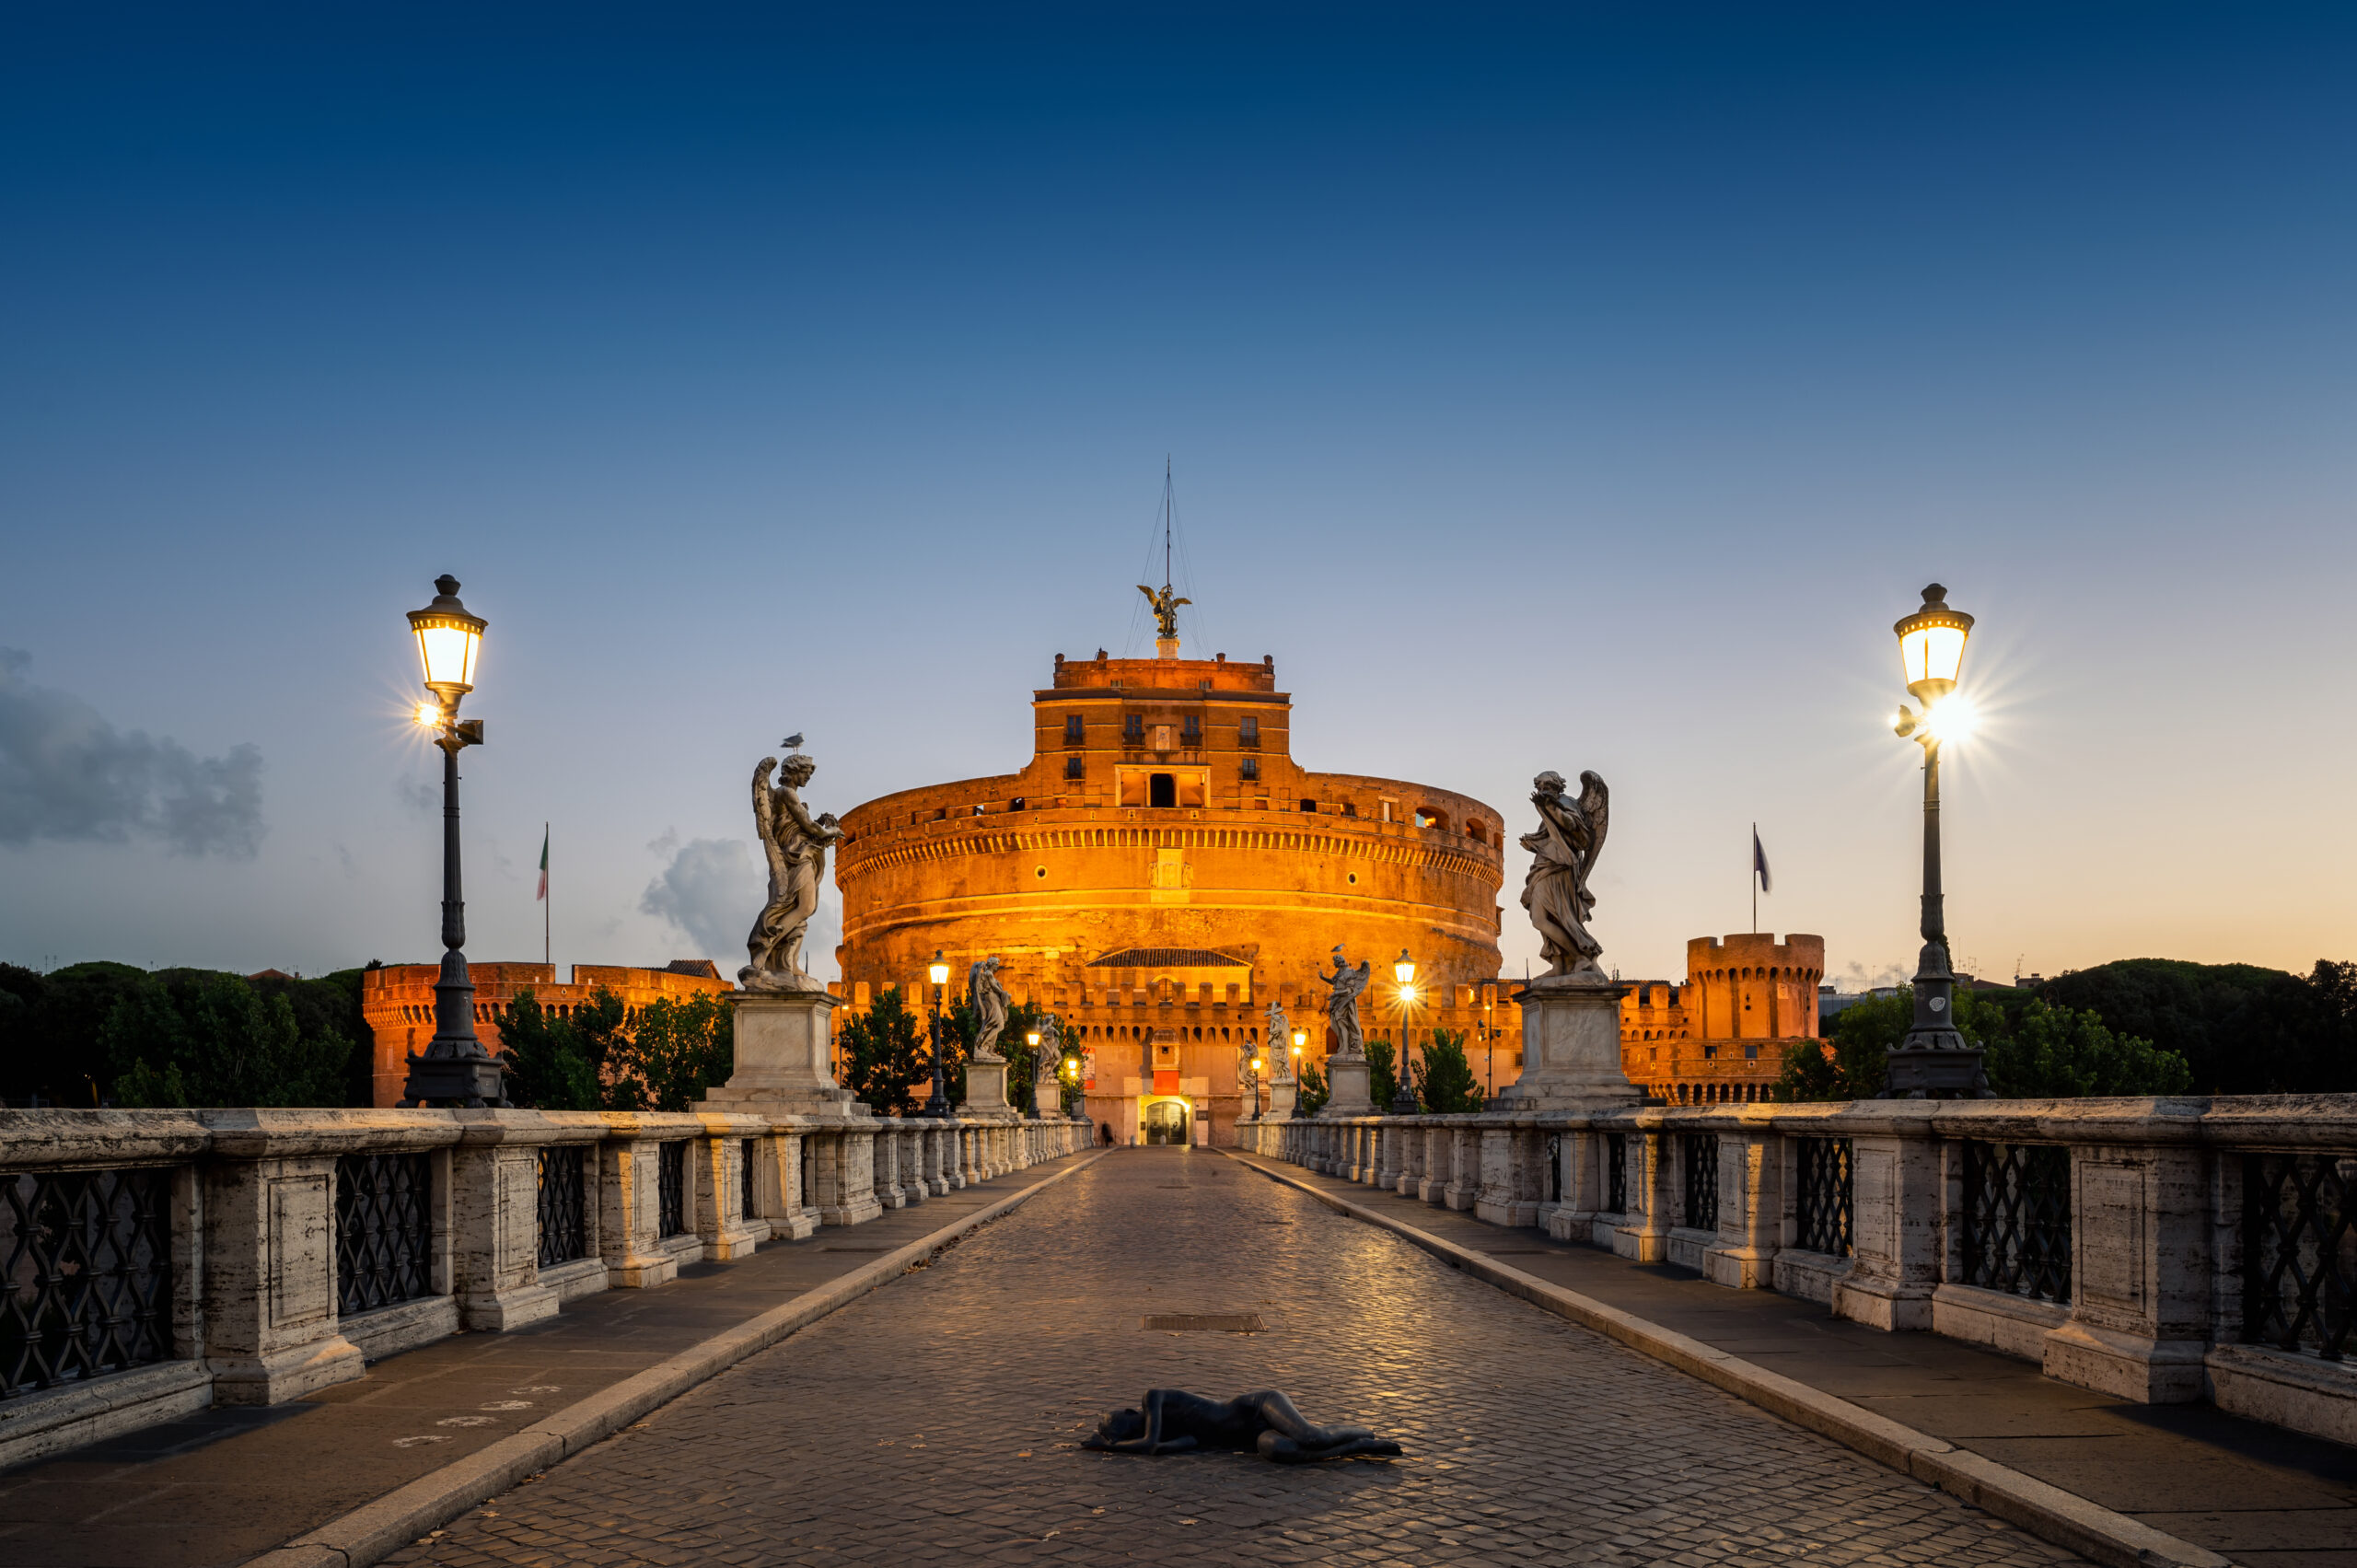 View of the illuminated Mausoleum of Hadrian, known as Castel Sant'Angelo from the Sant'Angelo bridge in blue hour before sunrise.